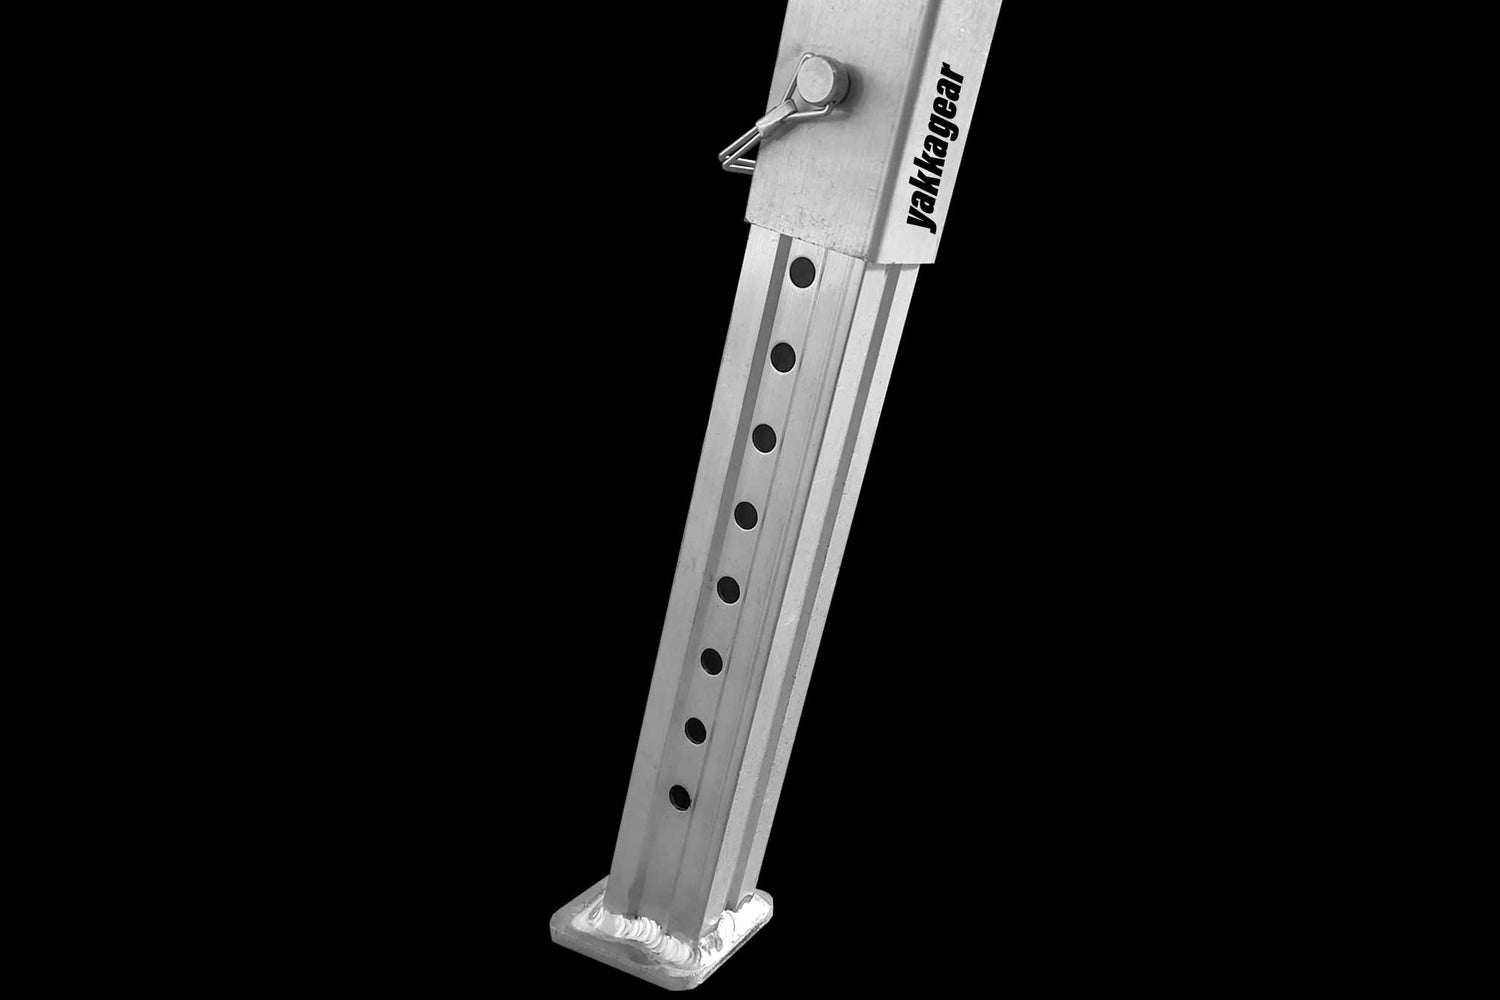 Yakka Gear Australia Aluminium Trestles as access equipment. Various sized trestles available including 1.8m, 2.4m, 3.0m, 3.6m, 4.2m. All the trestles are adjustable by 260mm with Adjustable legs. Zoomed in detailed view of the adjustable legs from the side on a black background. 